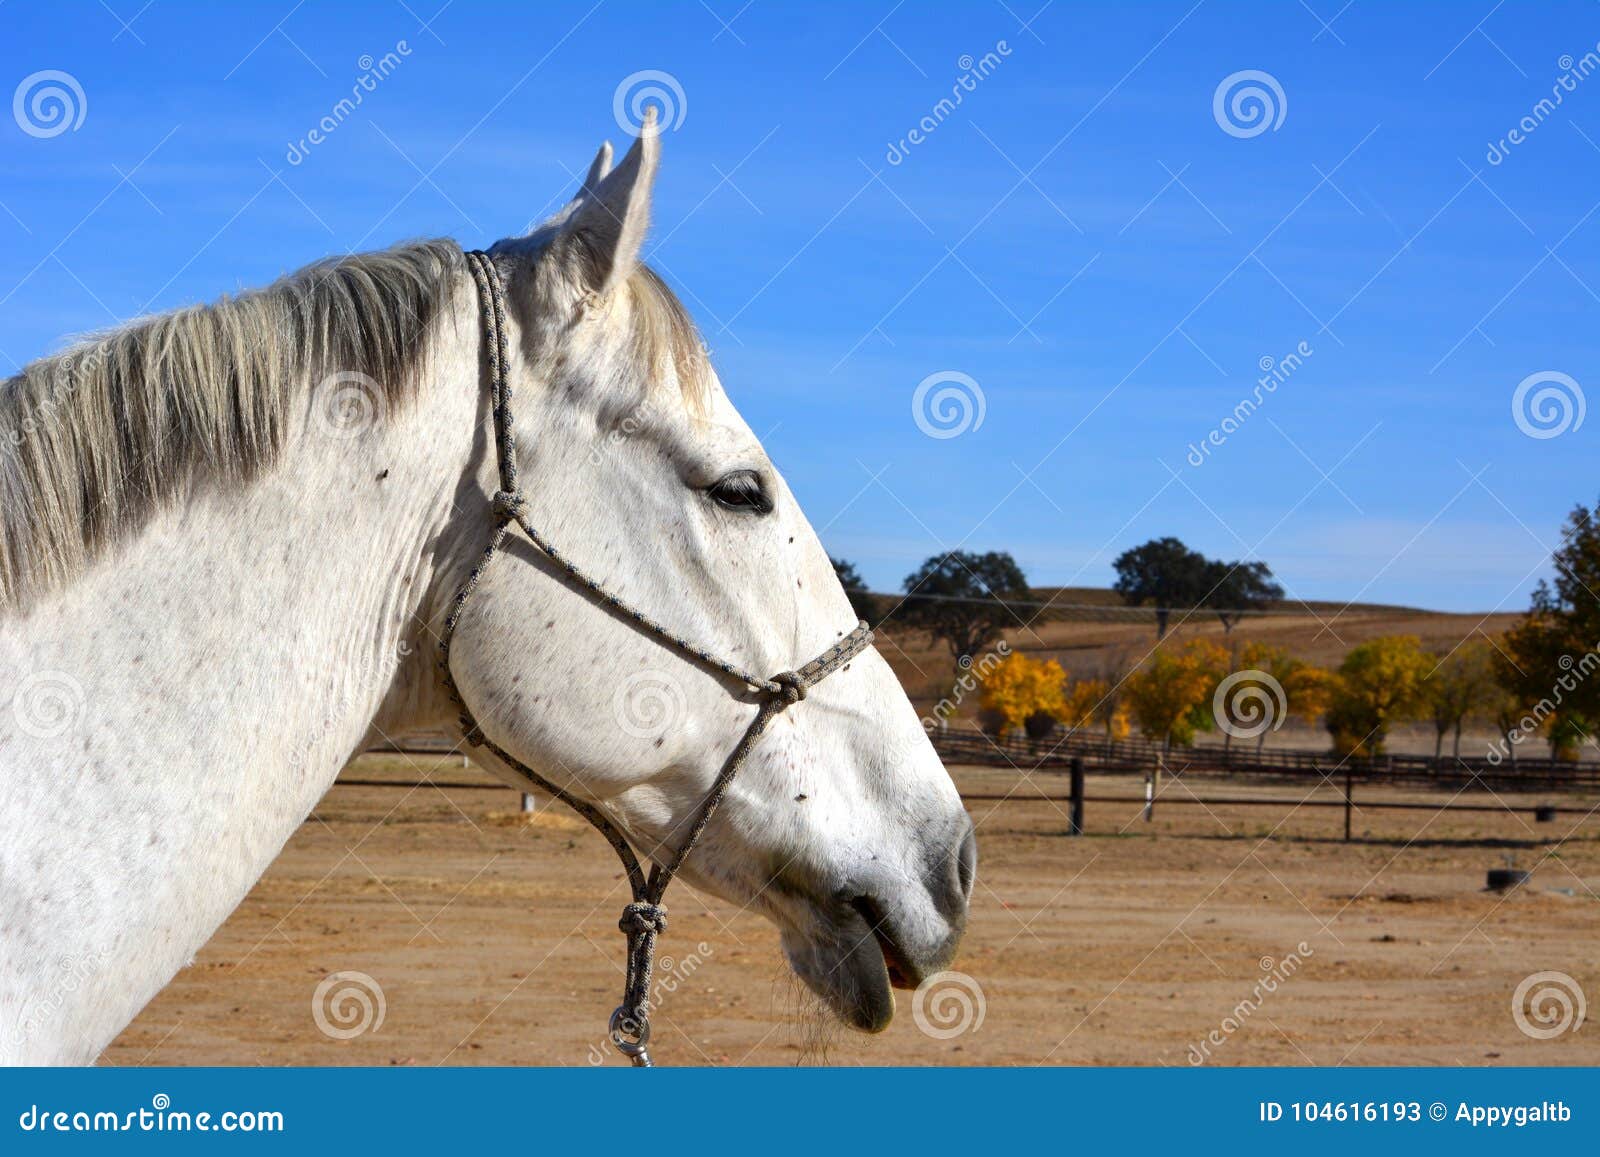 gray american quarter horse gelding with oak trees and autumn colors